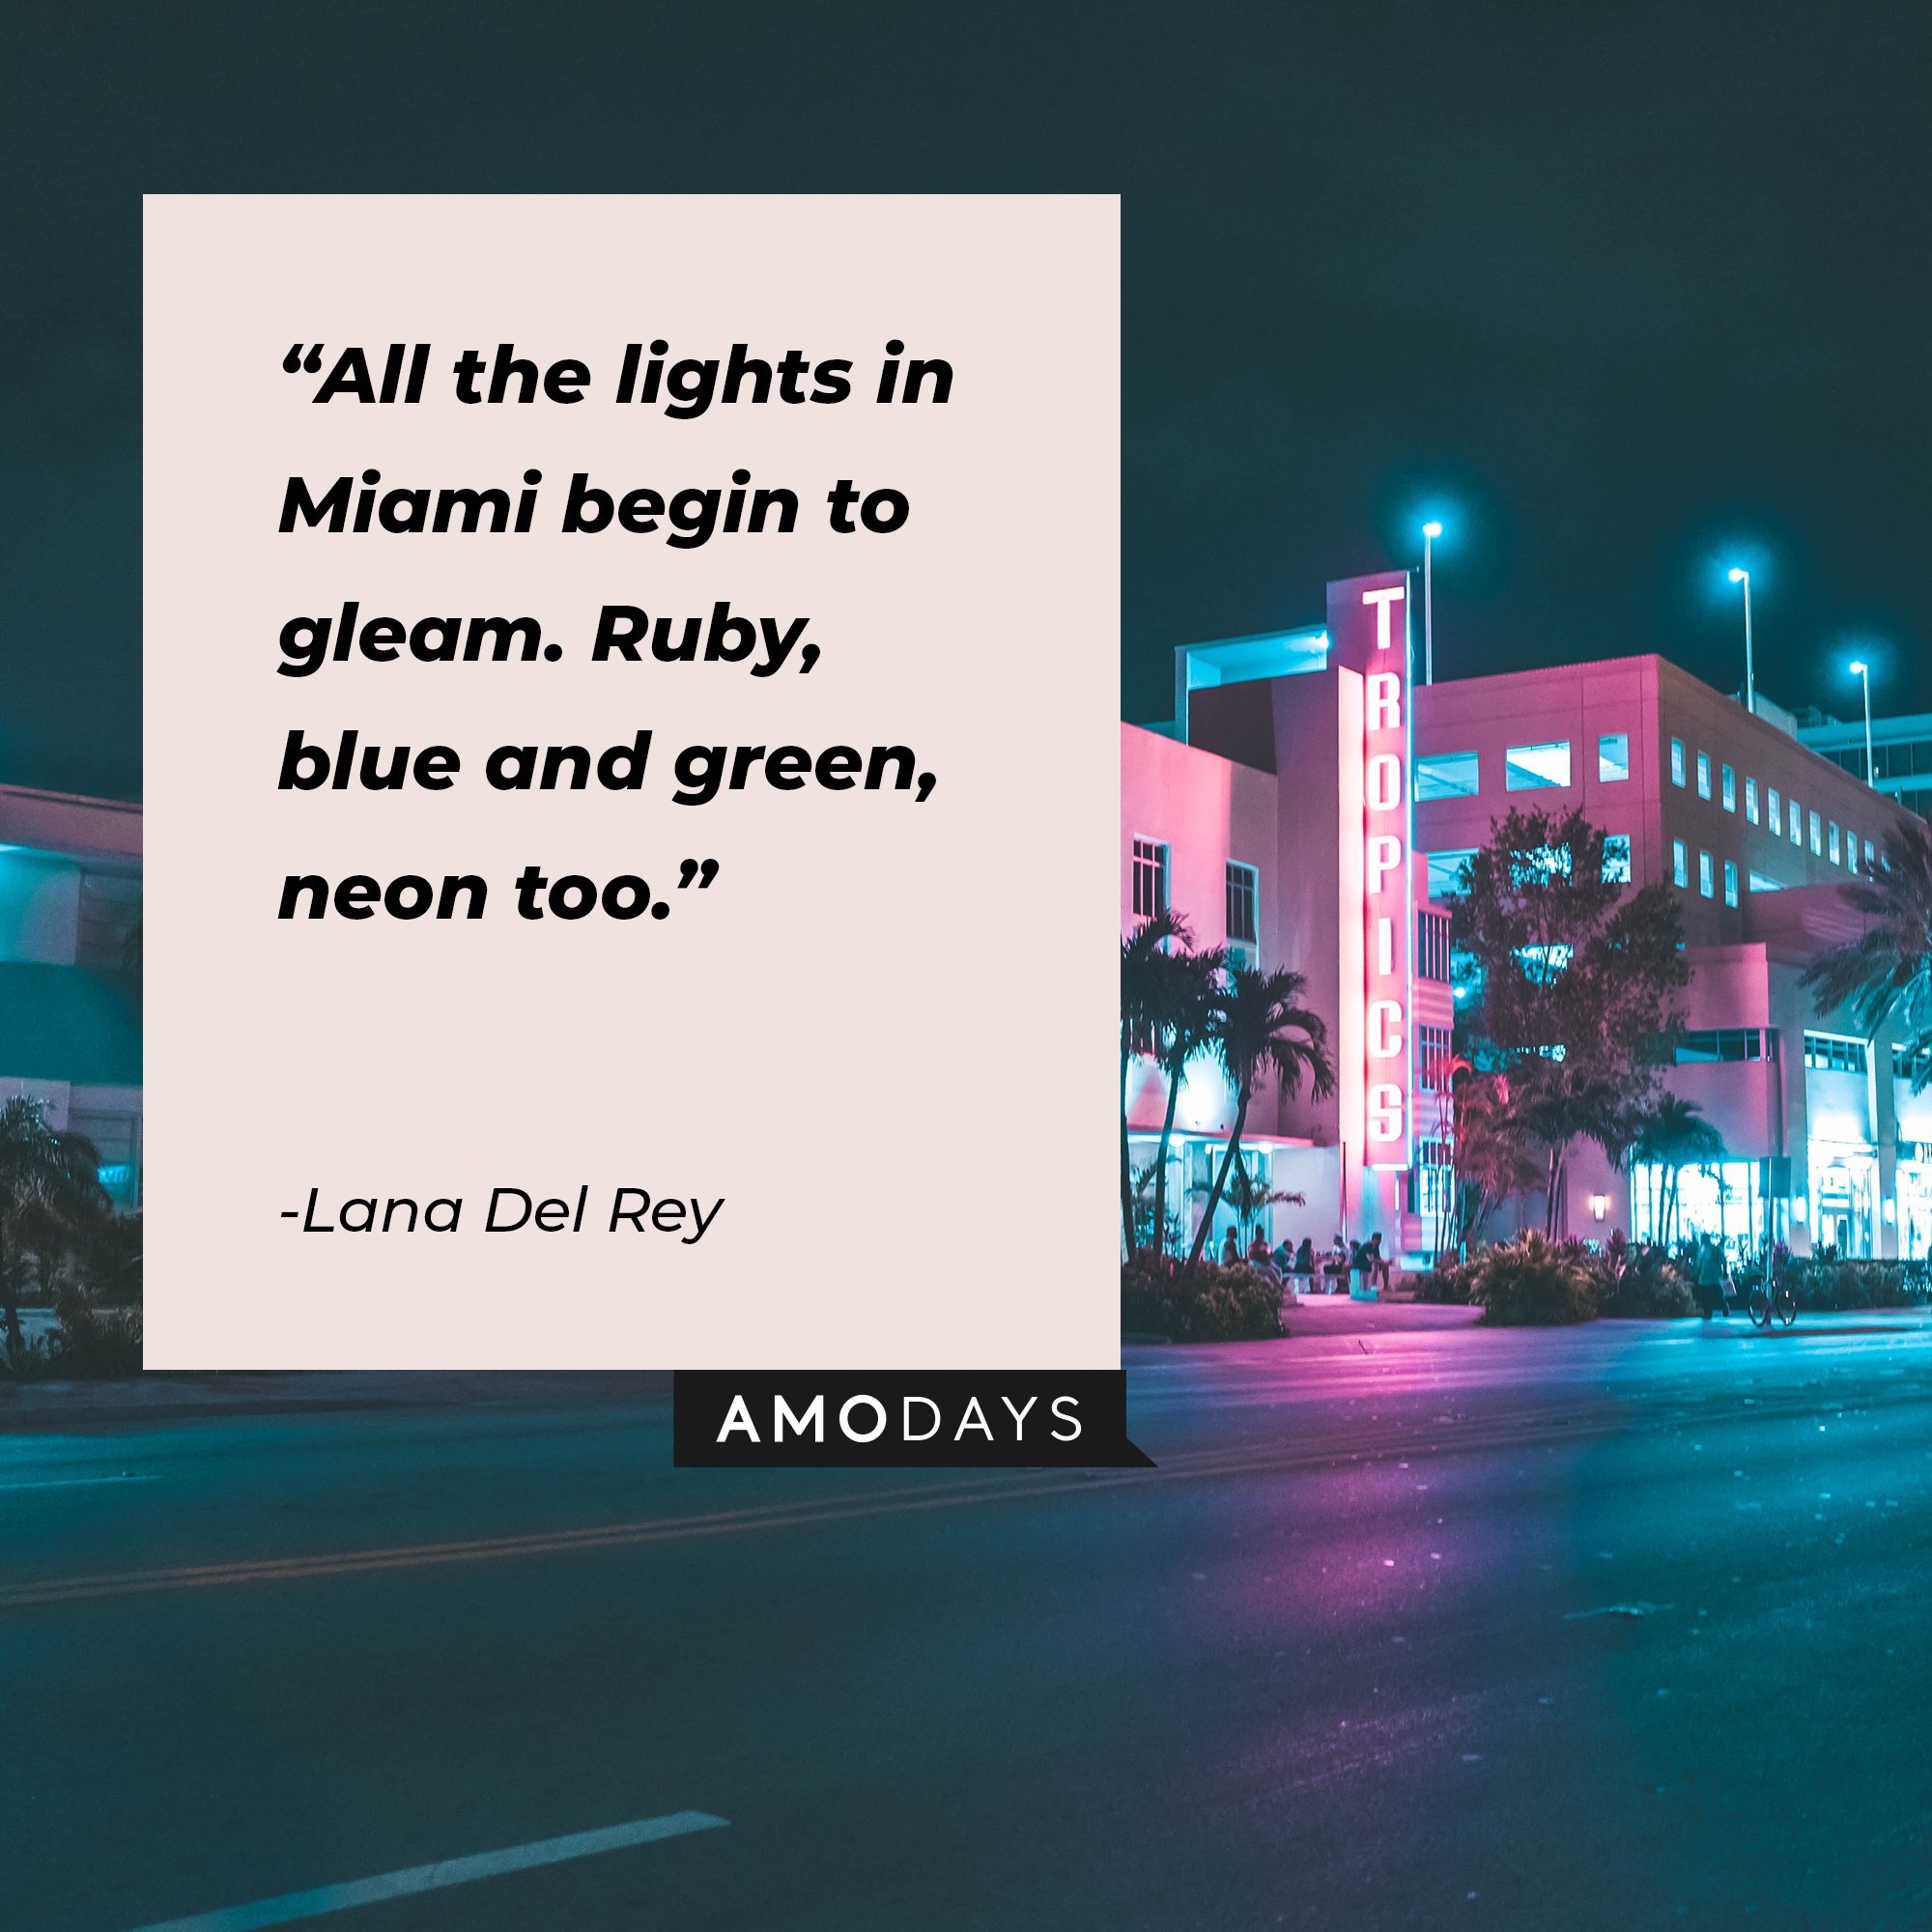 Lana Del Rey’s quote: "All the lights in Miami begin to gleam. Ruby, blue and green, neon too." | Image: AmoDays